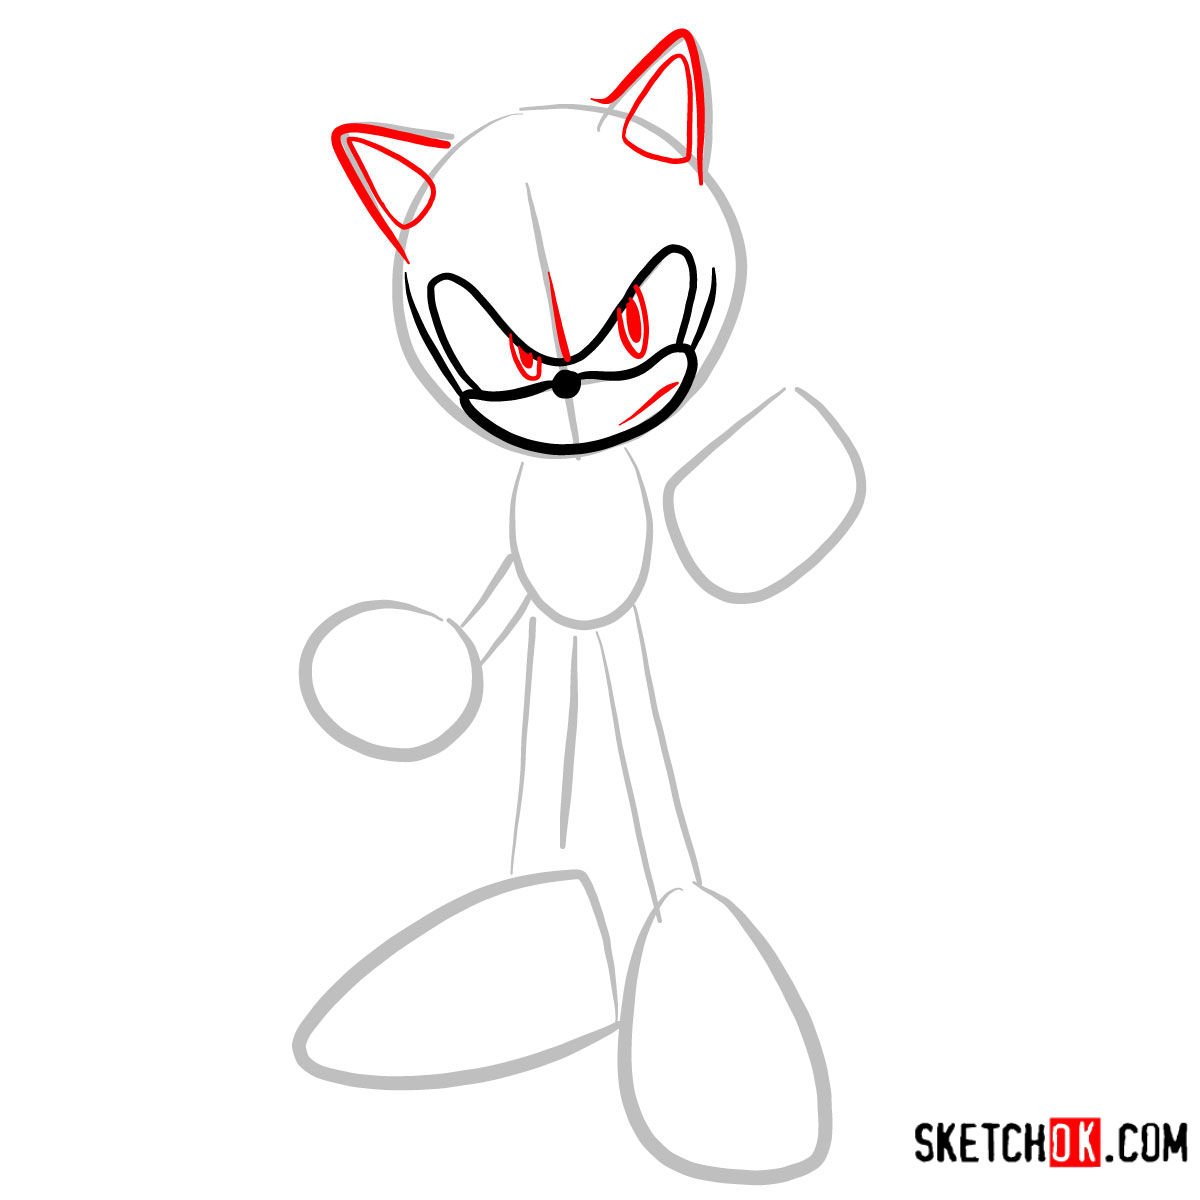 How to draw Sonic the Hedgehog - step 03